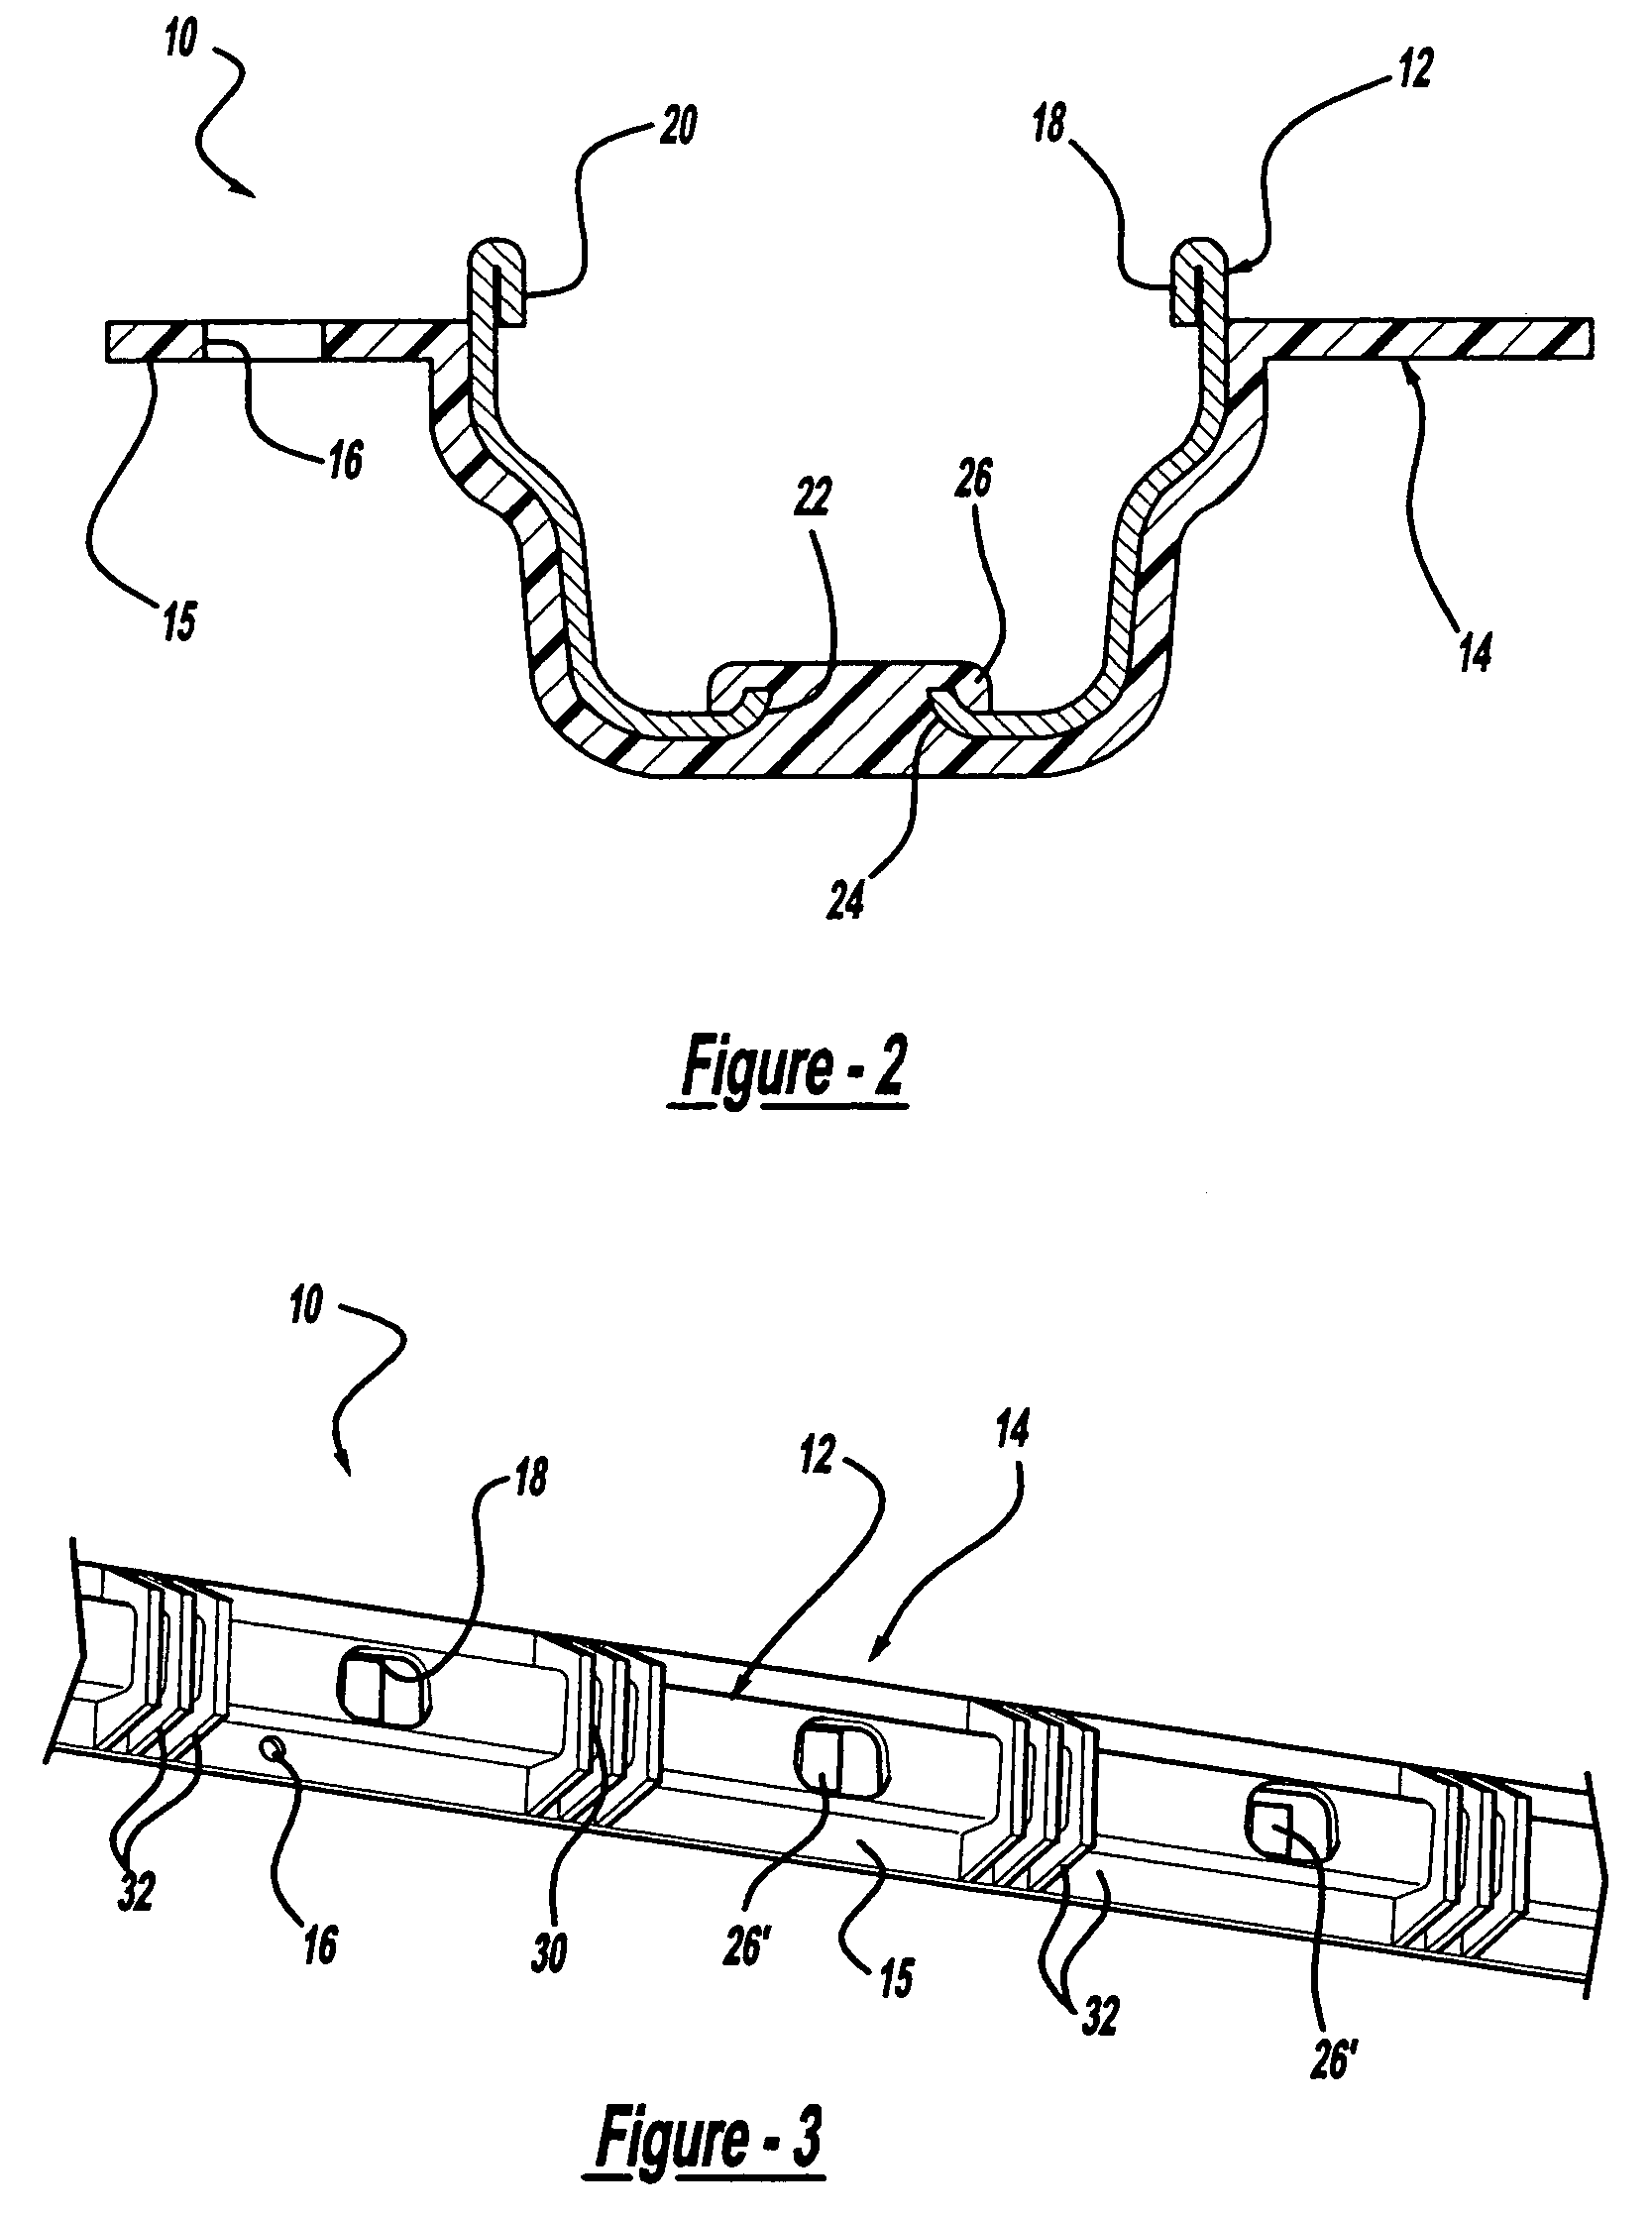 Method of attaching plastic to a metal section and part made thereby